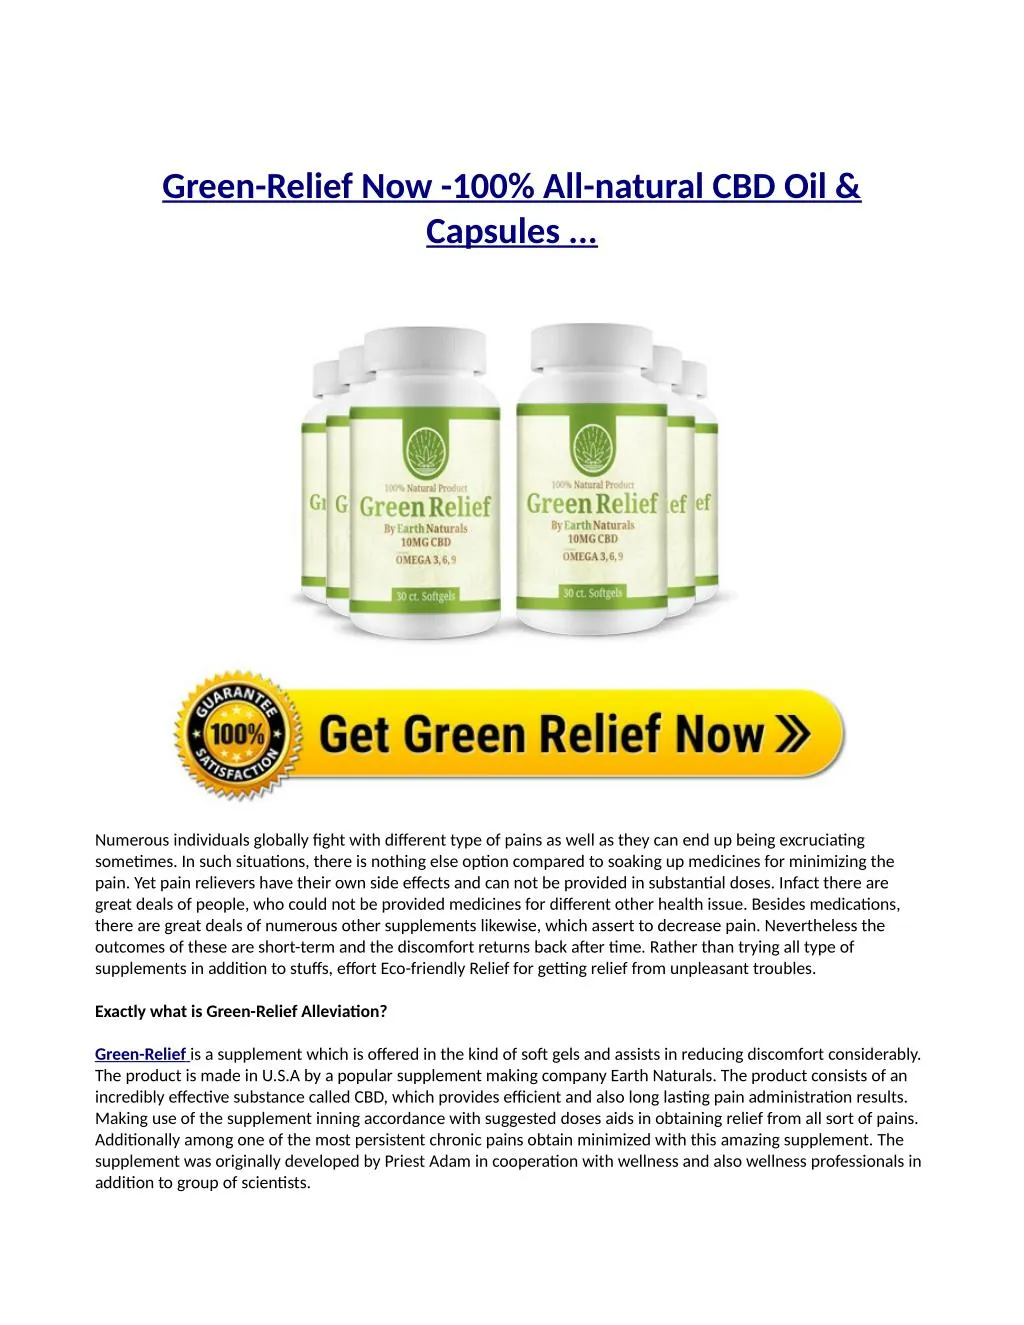 green relief now 100 all natural cbd oil capsules